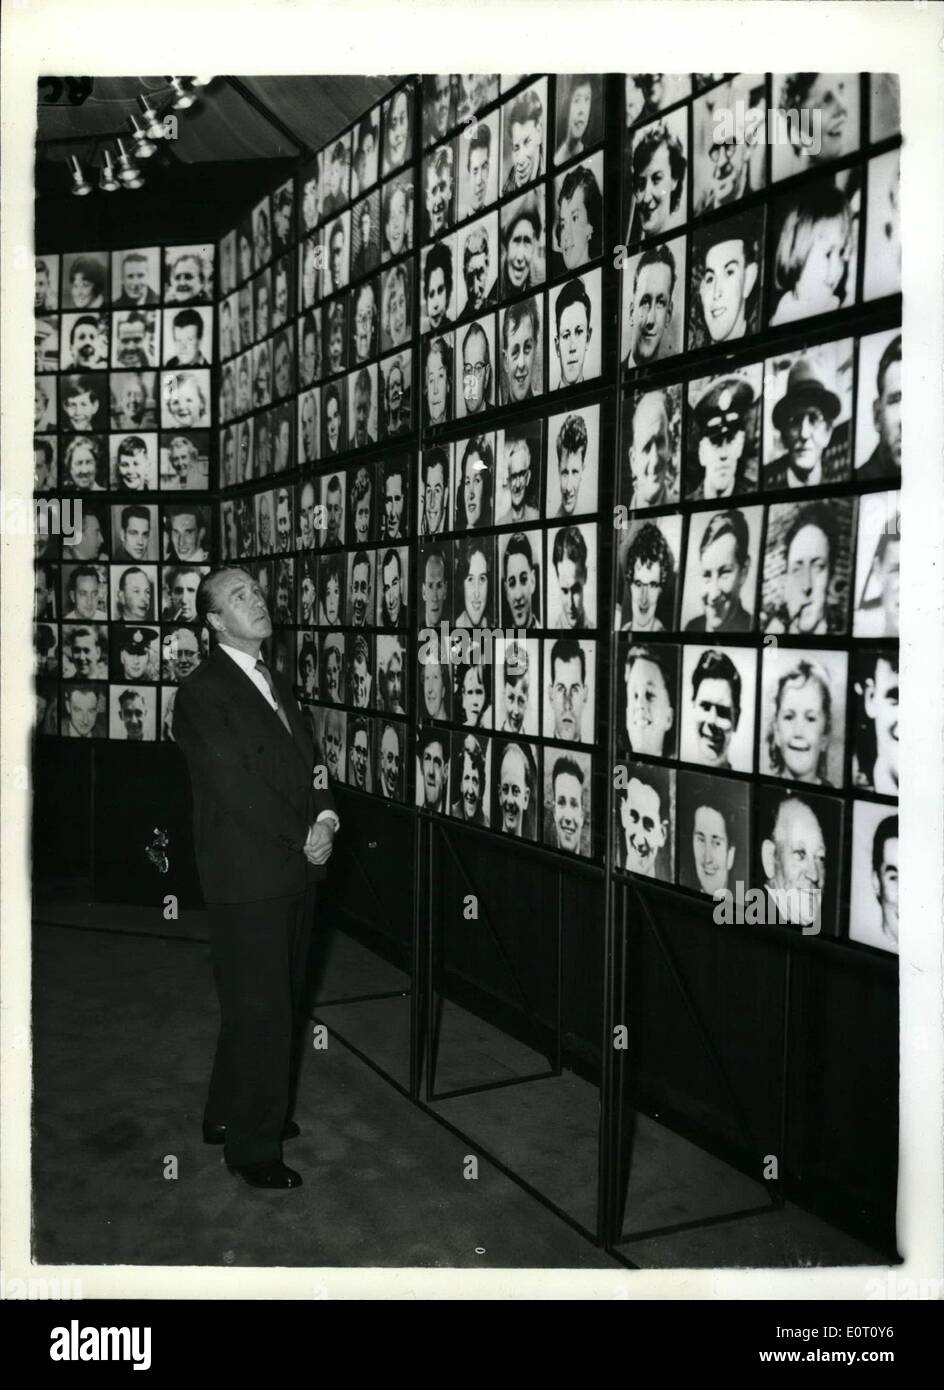 Jun. 06, 1960 - Minister Of Transport Opens Road Safety Exhibition; Mr. Ernest Marples the minister of Transport this morning opened the 'Battle of the Roads'' - Road Safety Exhibition - at the Royal British Artists' Galleries, Suffolk Street. Photo Shows Mr. Ernest Marples studies at a huge photograph of a road accident - one of the exhibit this morning. Stock Photo